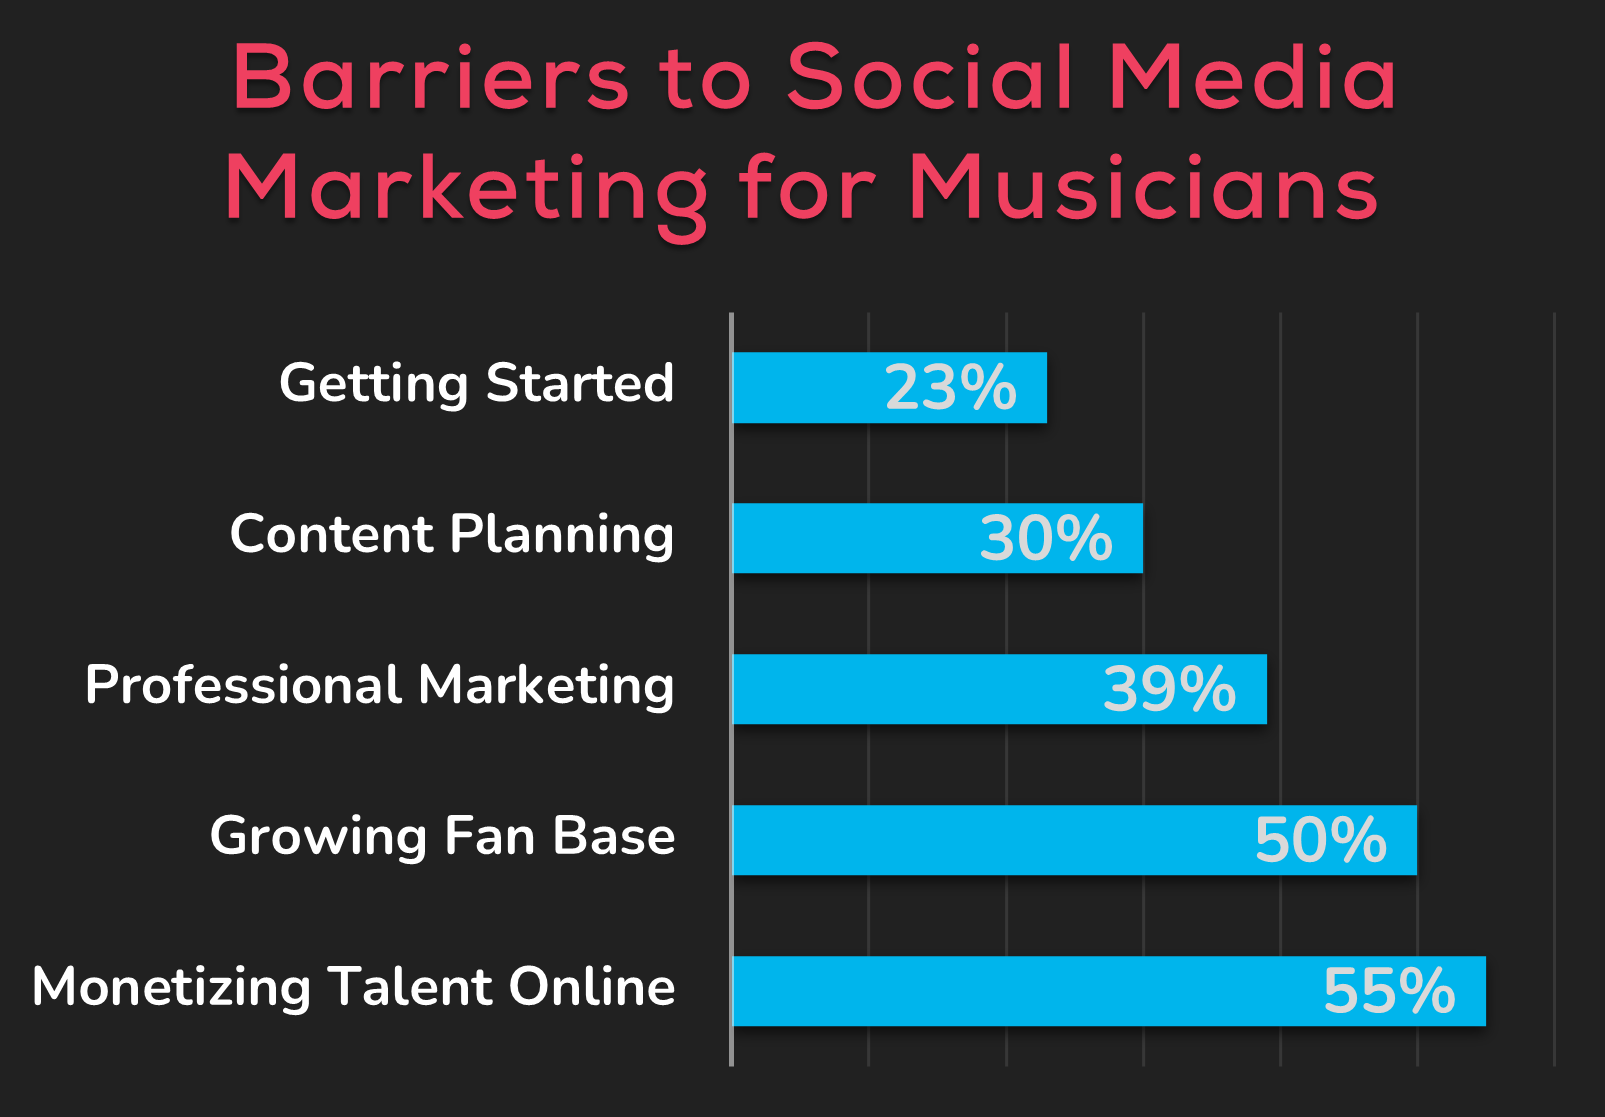 JamWith survey results of musicians in 2021 showing the barriers to social media marketing for musicians